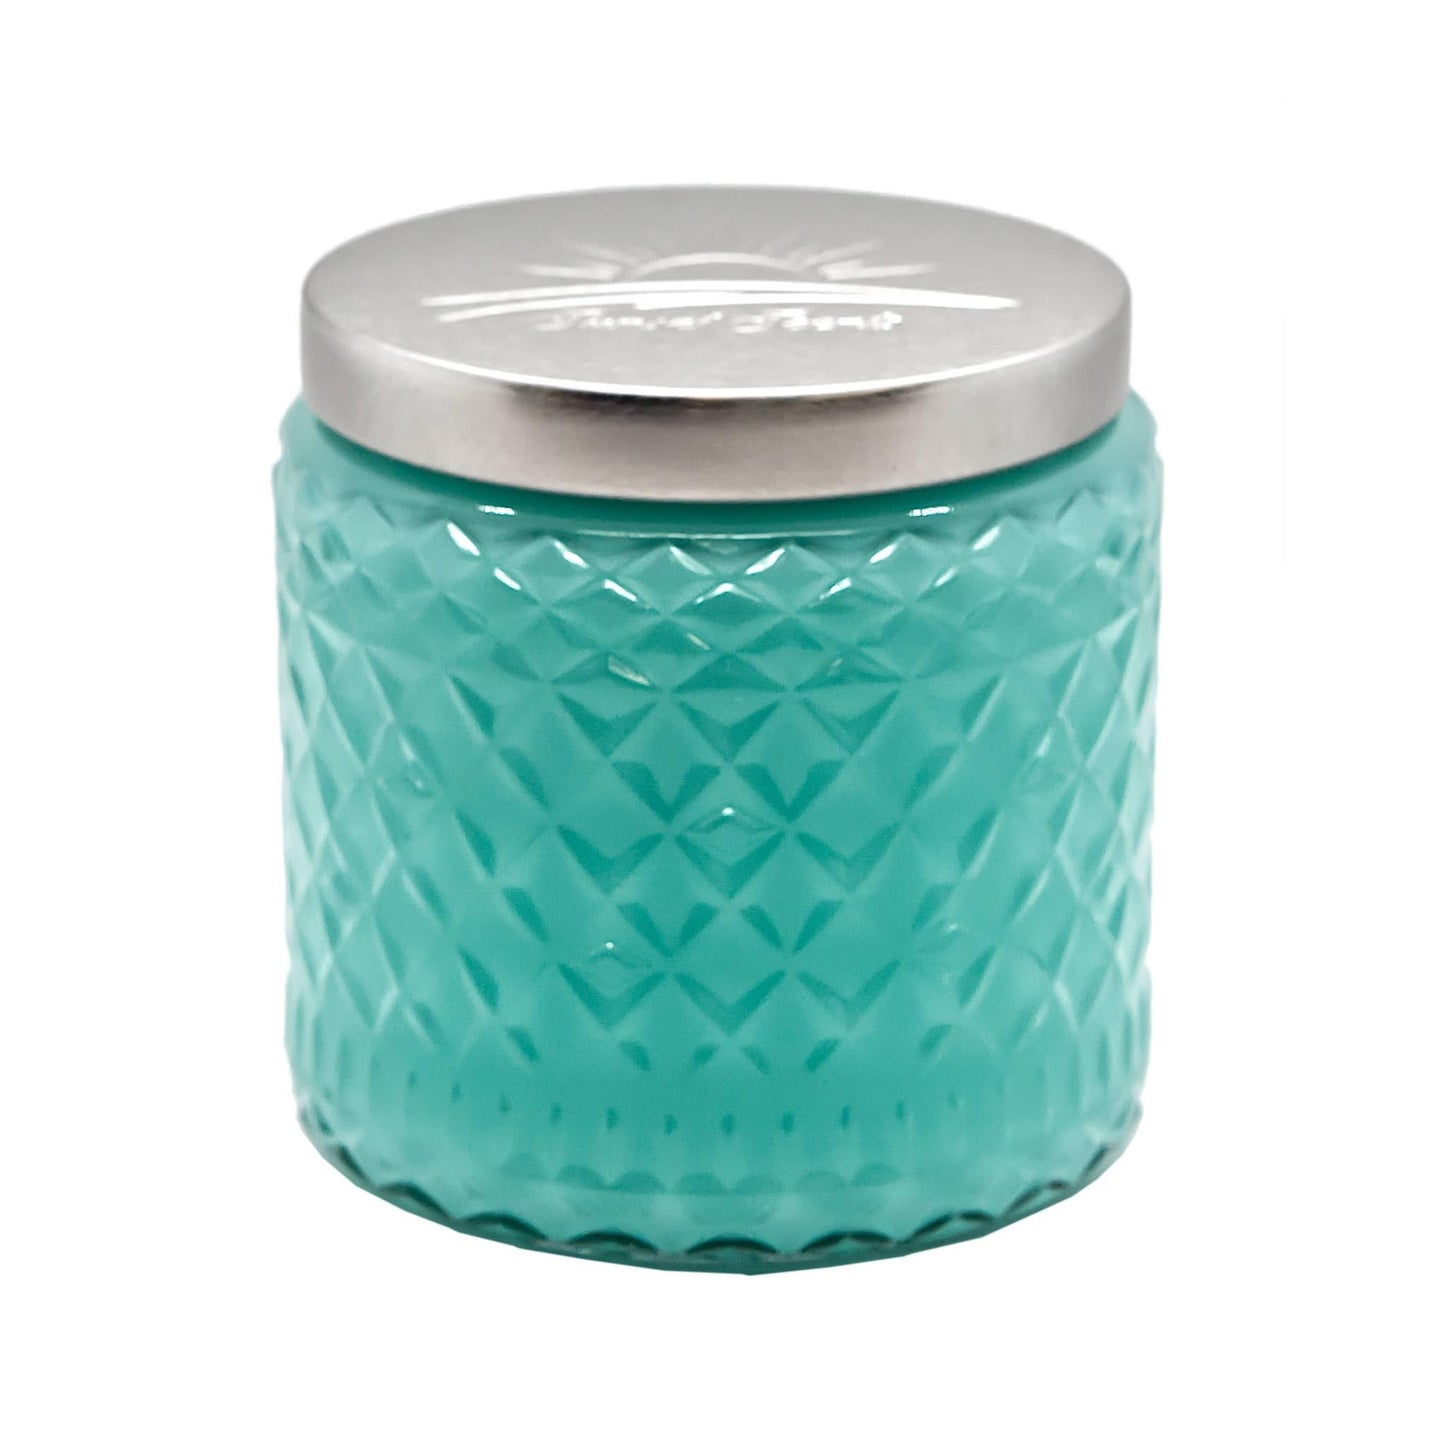 Turquoise & Caicos Scented Candle